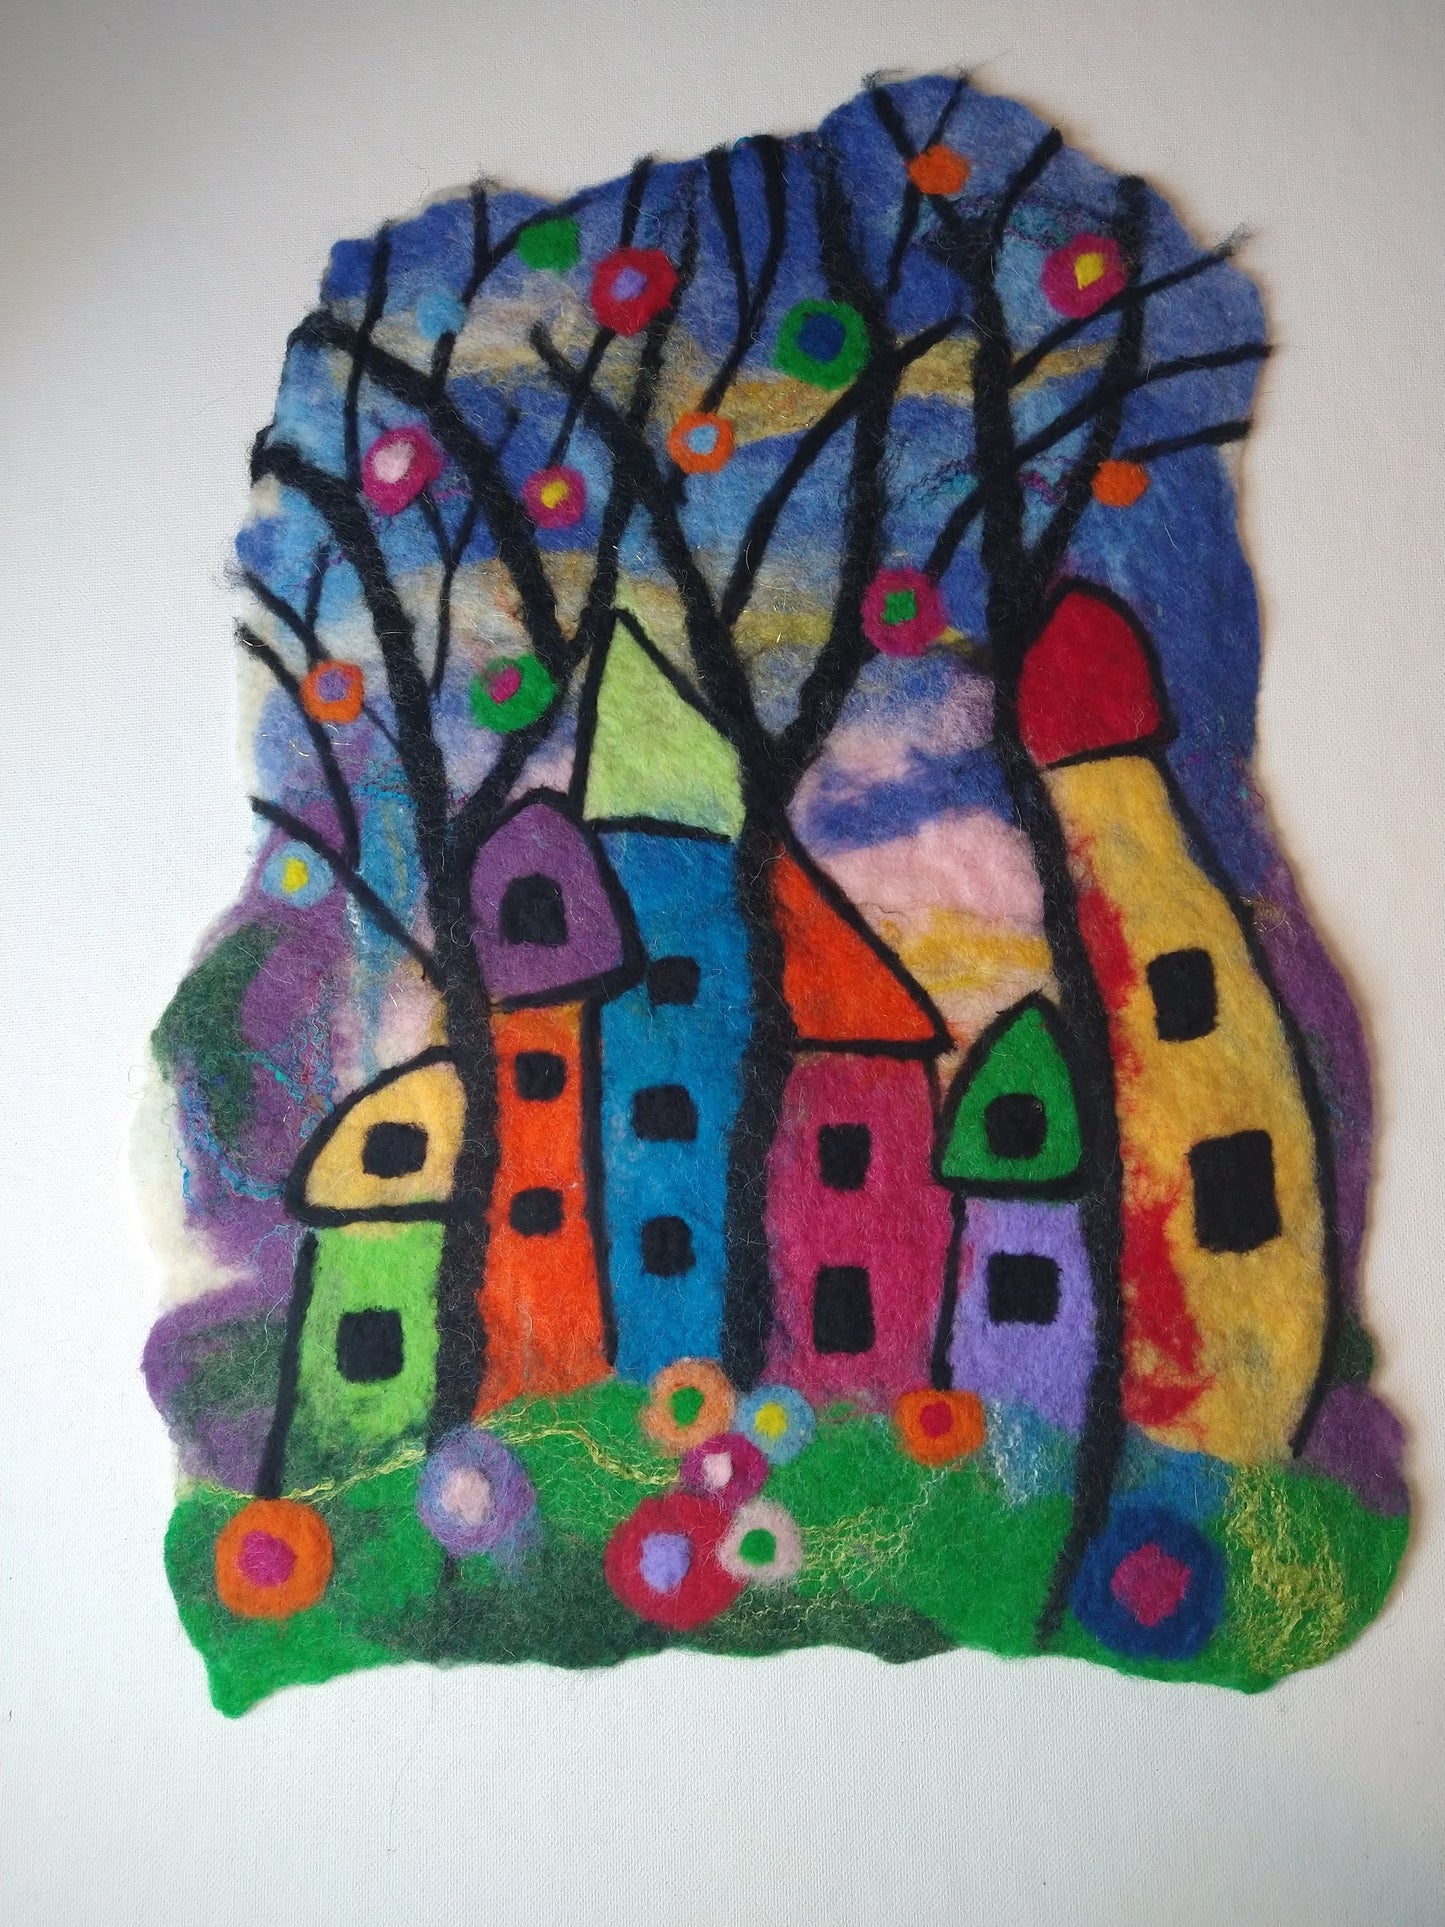 kaleidoscope houses felted wool wall hanging dr seuss style stained glass art style